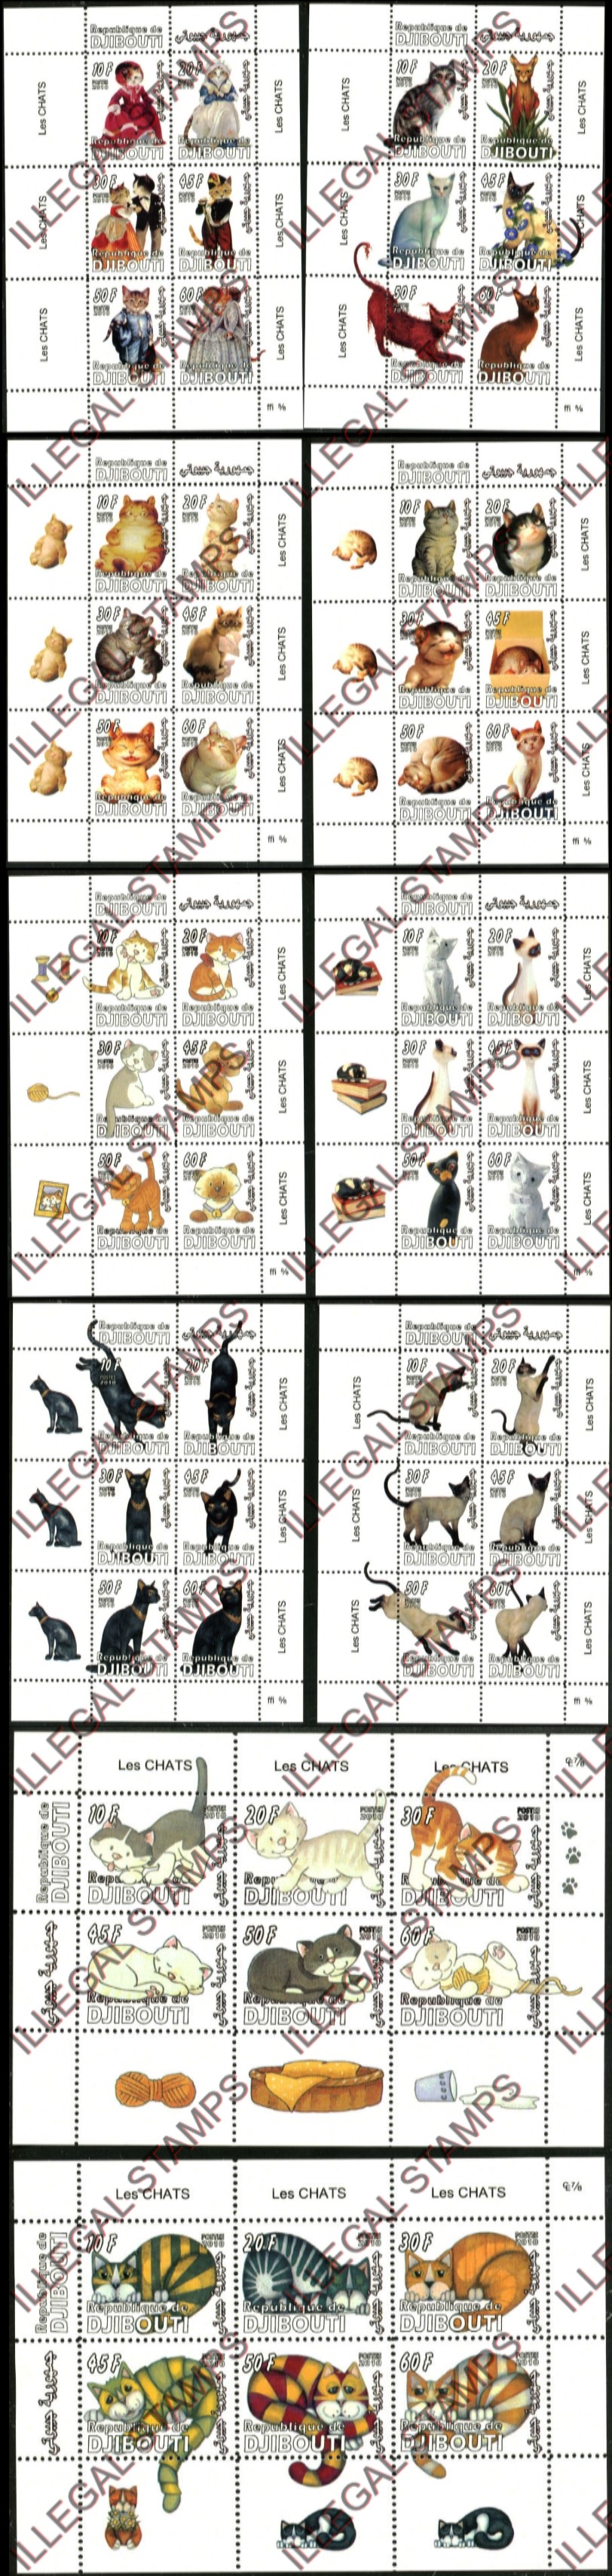 Djibouti 2010 Cats Illegal Stamp Sheetlets of 6